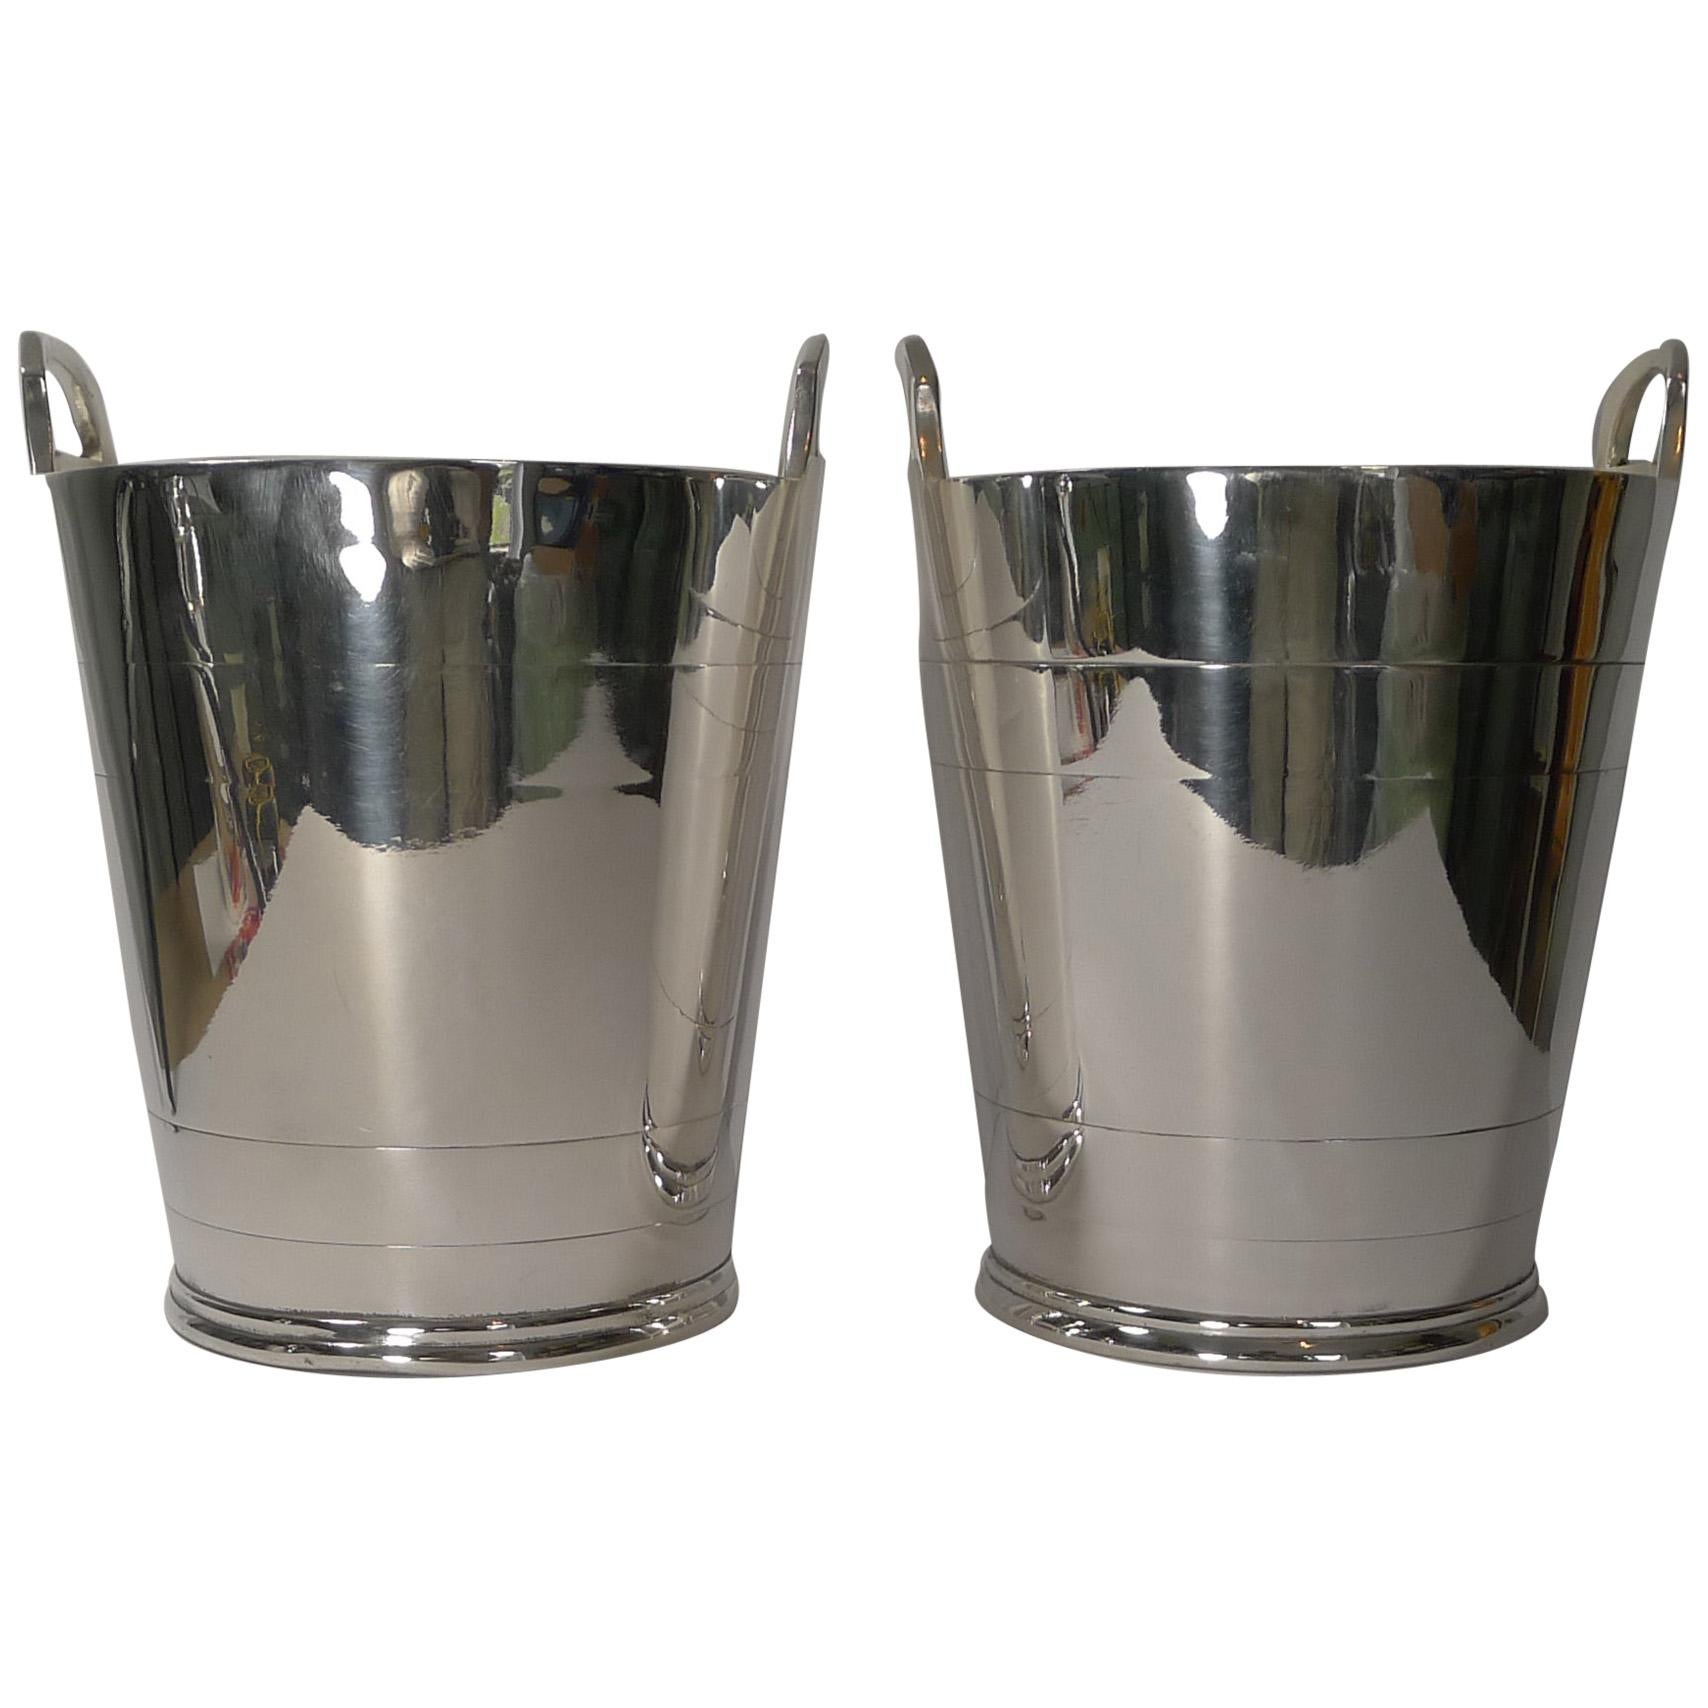 Fine Pair of Mappin & Webb Silver Plated Wine Coolers / Champagne Buckets